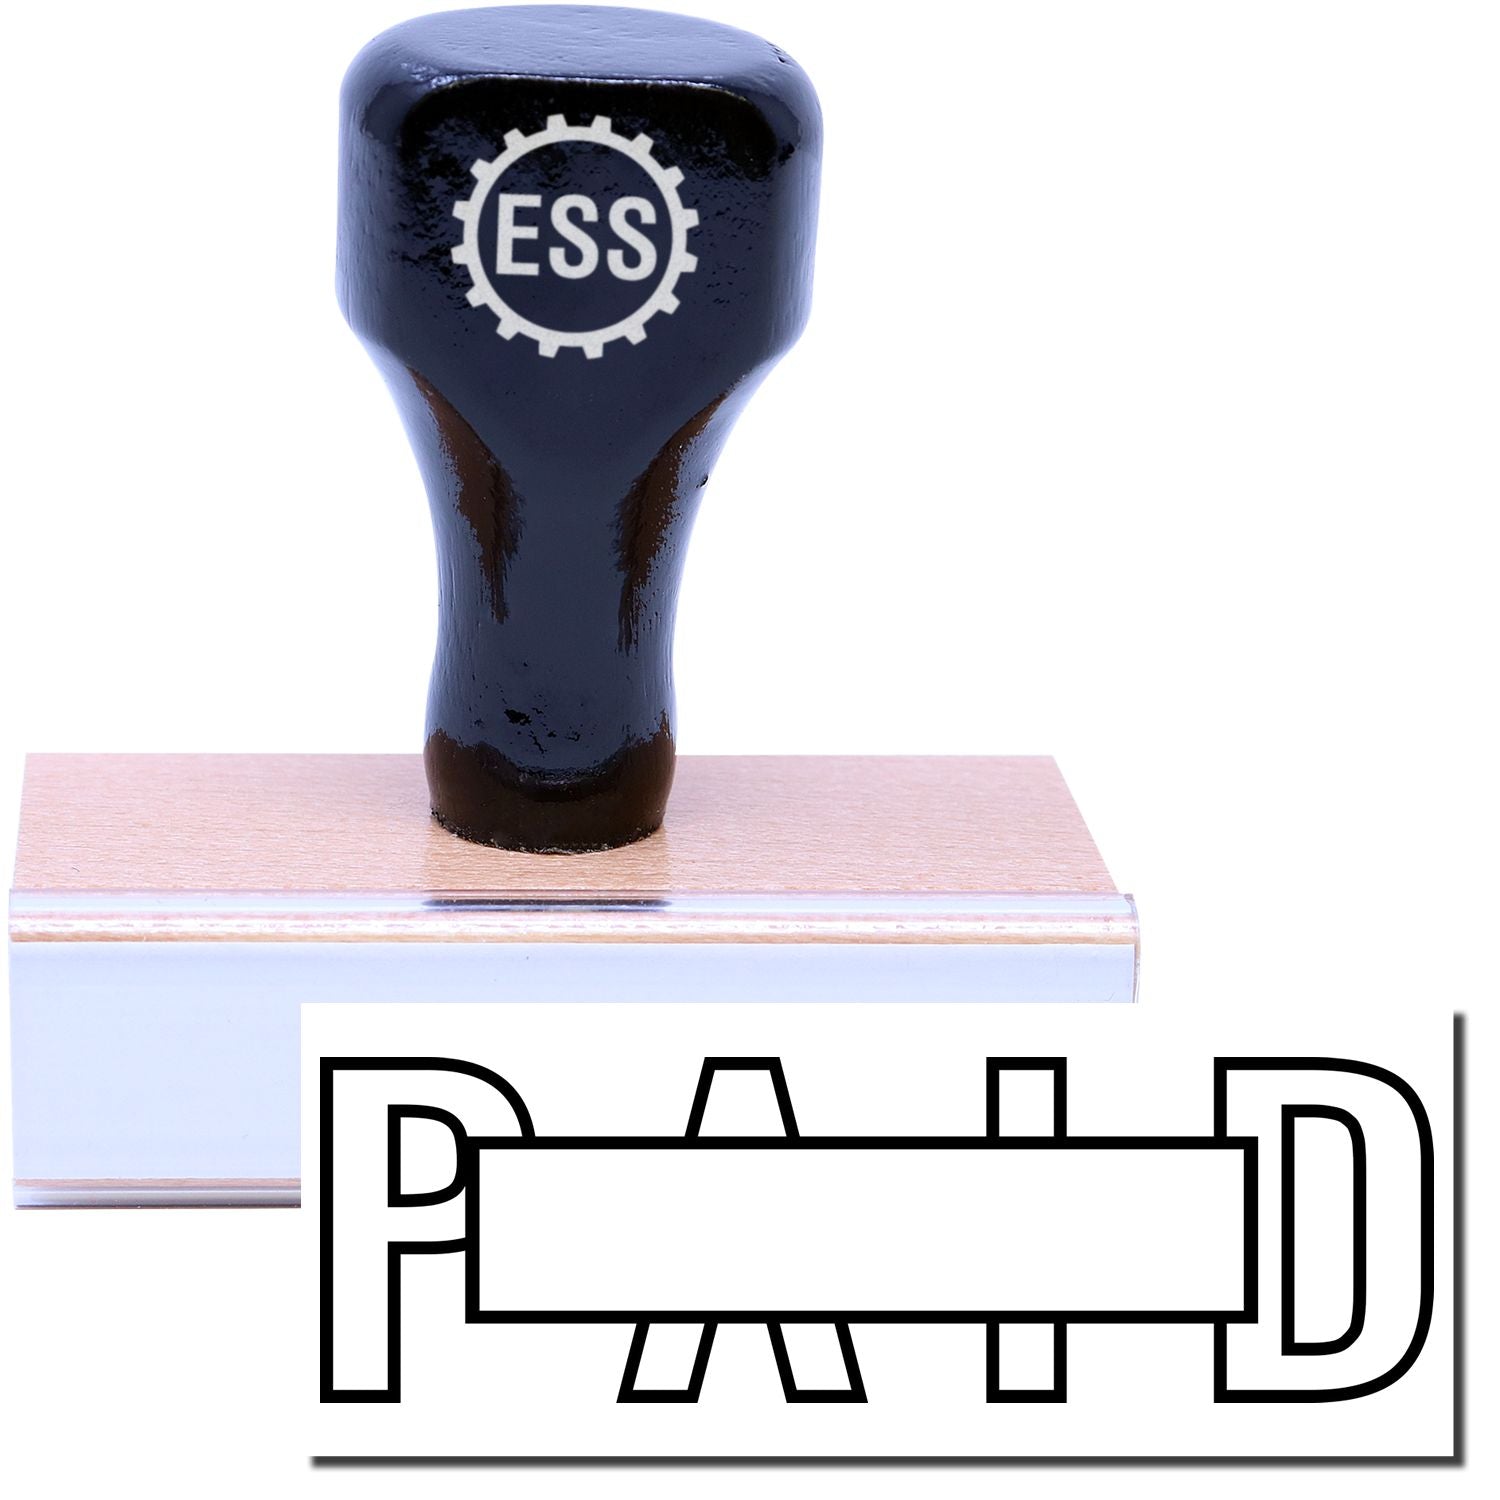 A stock office rubber stamp with a stamped image showing how the text "PAID" in a large outline font with a box is displayed after stamping.